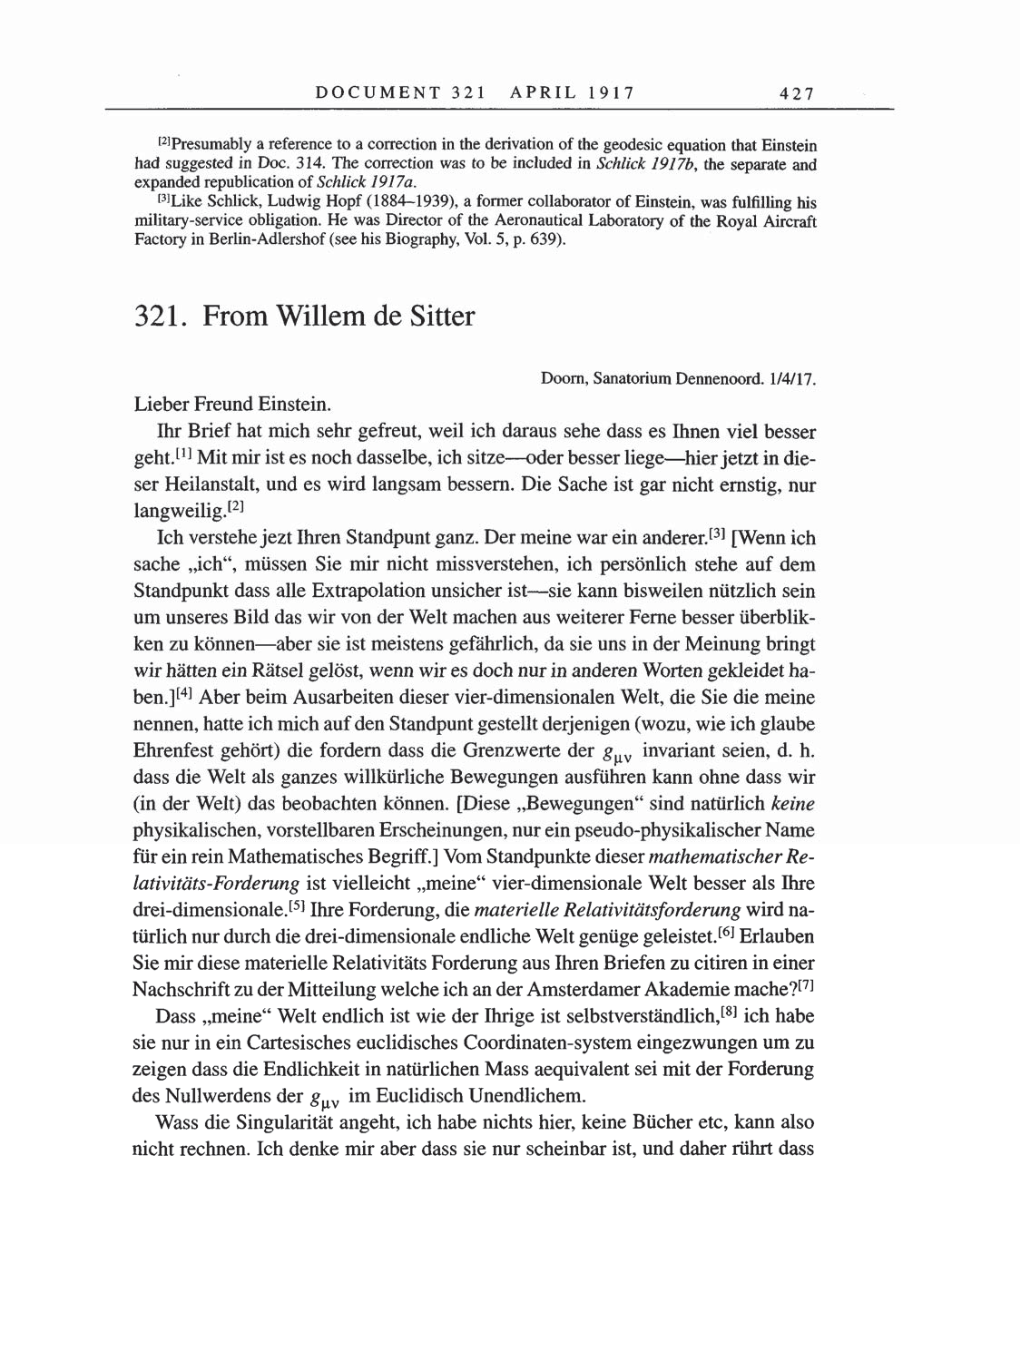 Volume 8, Part A: The Berlin Years: Correspondence 1914-1917 page 427